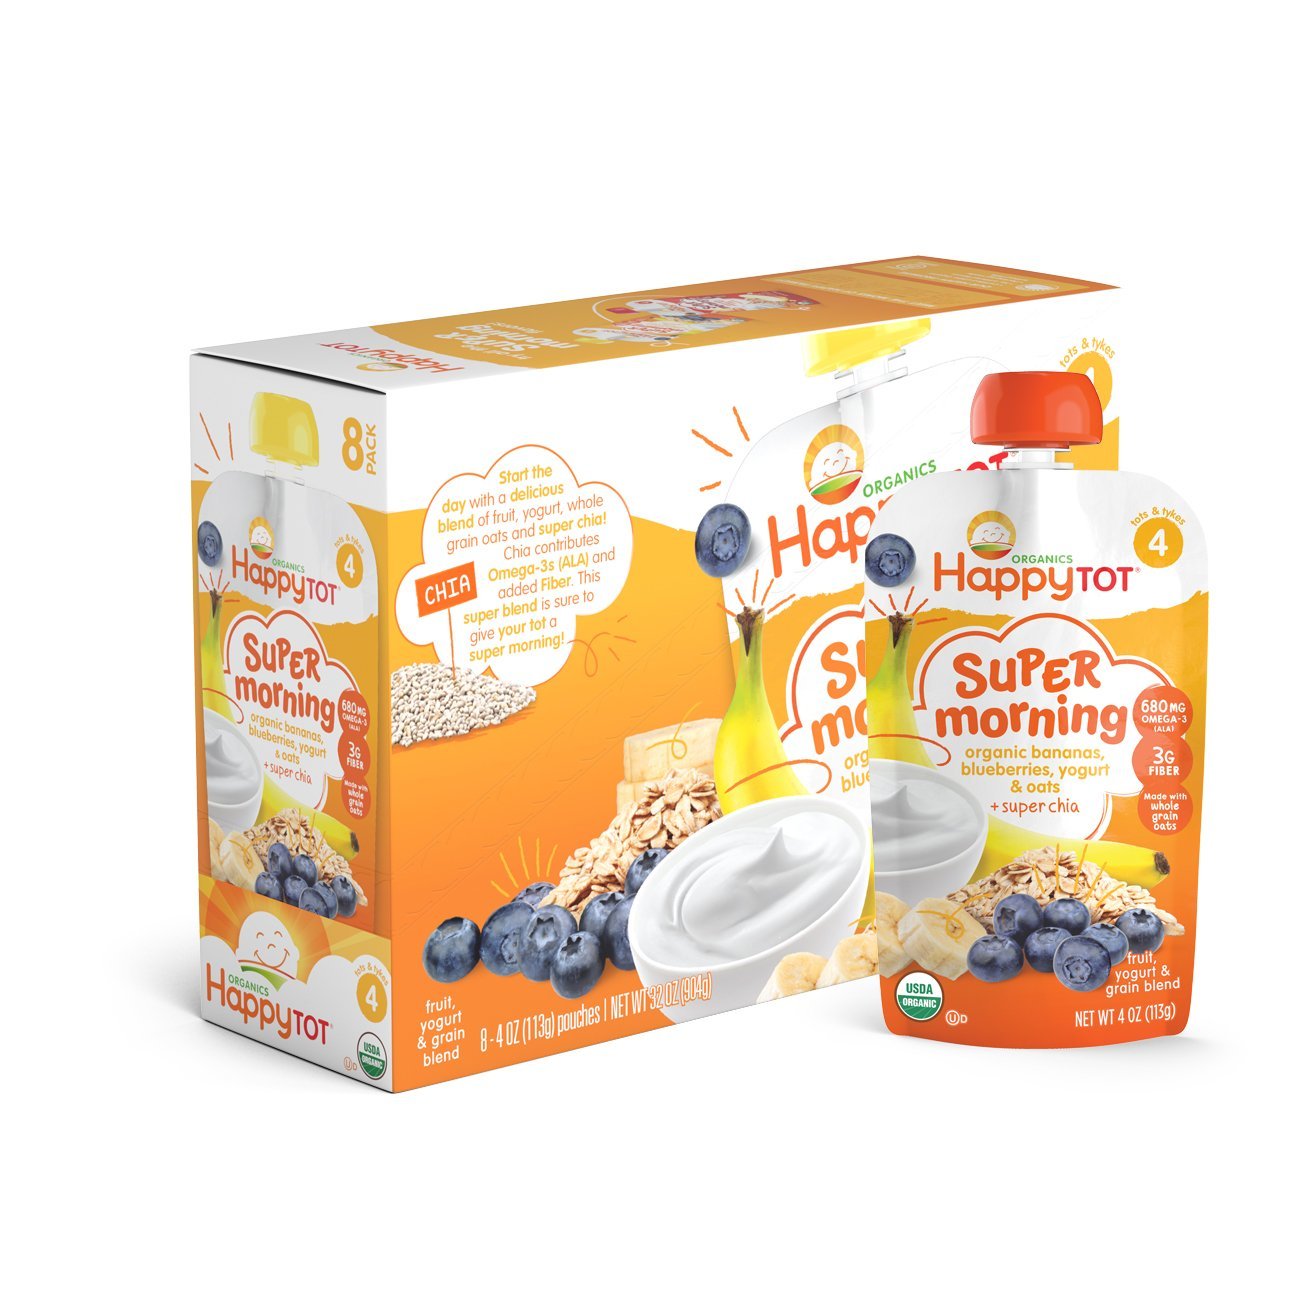 Happy Tot Organic Stage 4 Super Morning (Banana, Blueberries, Yogurt & Oats) Only $7.41 Shipped!